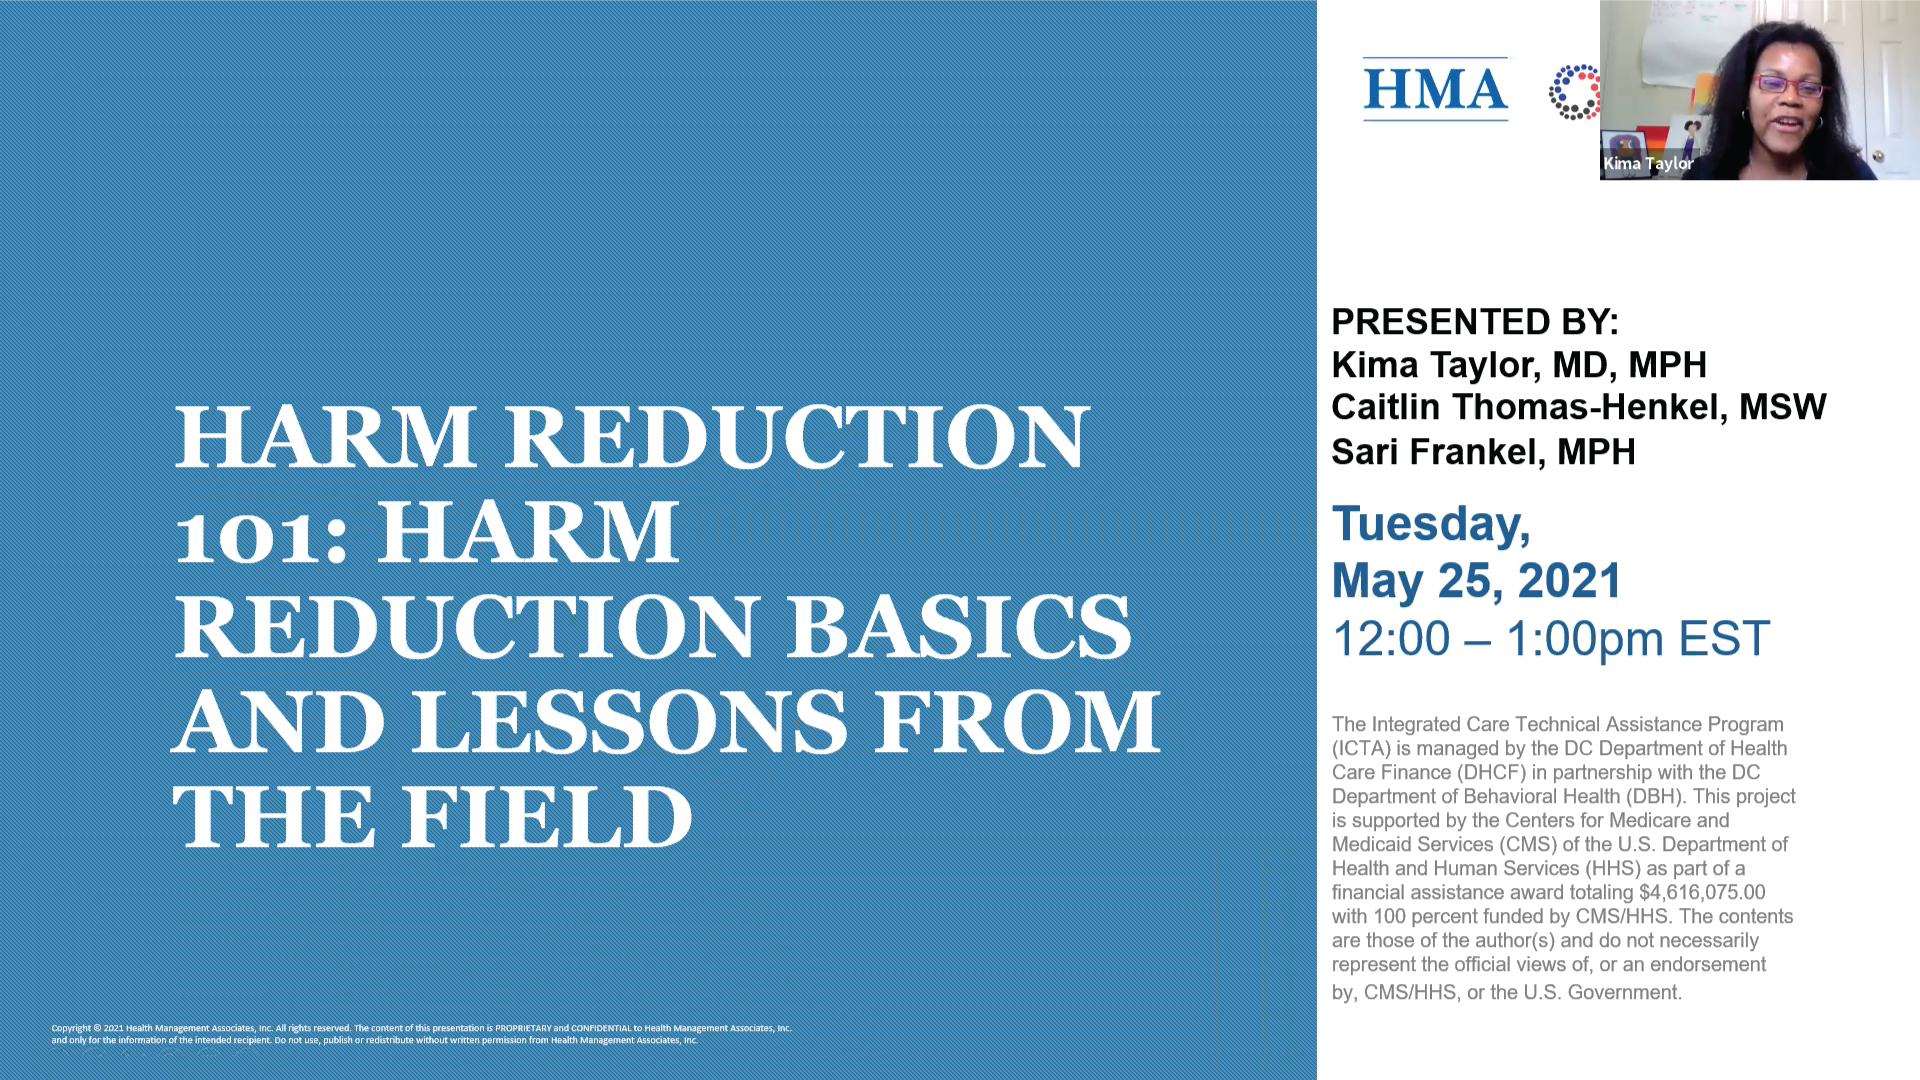 Harm Reduction 101: Harm Reduction Basics and Lessons From the Field